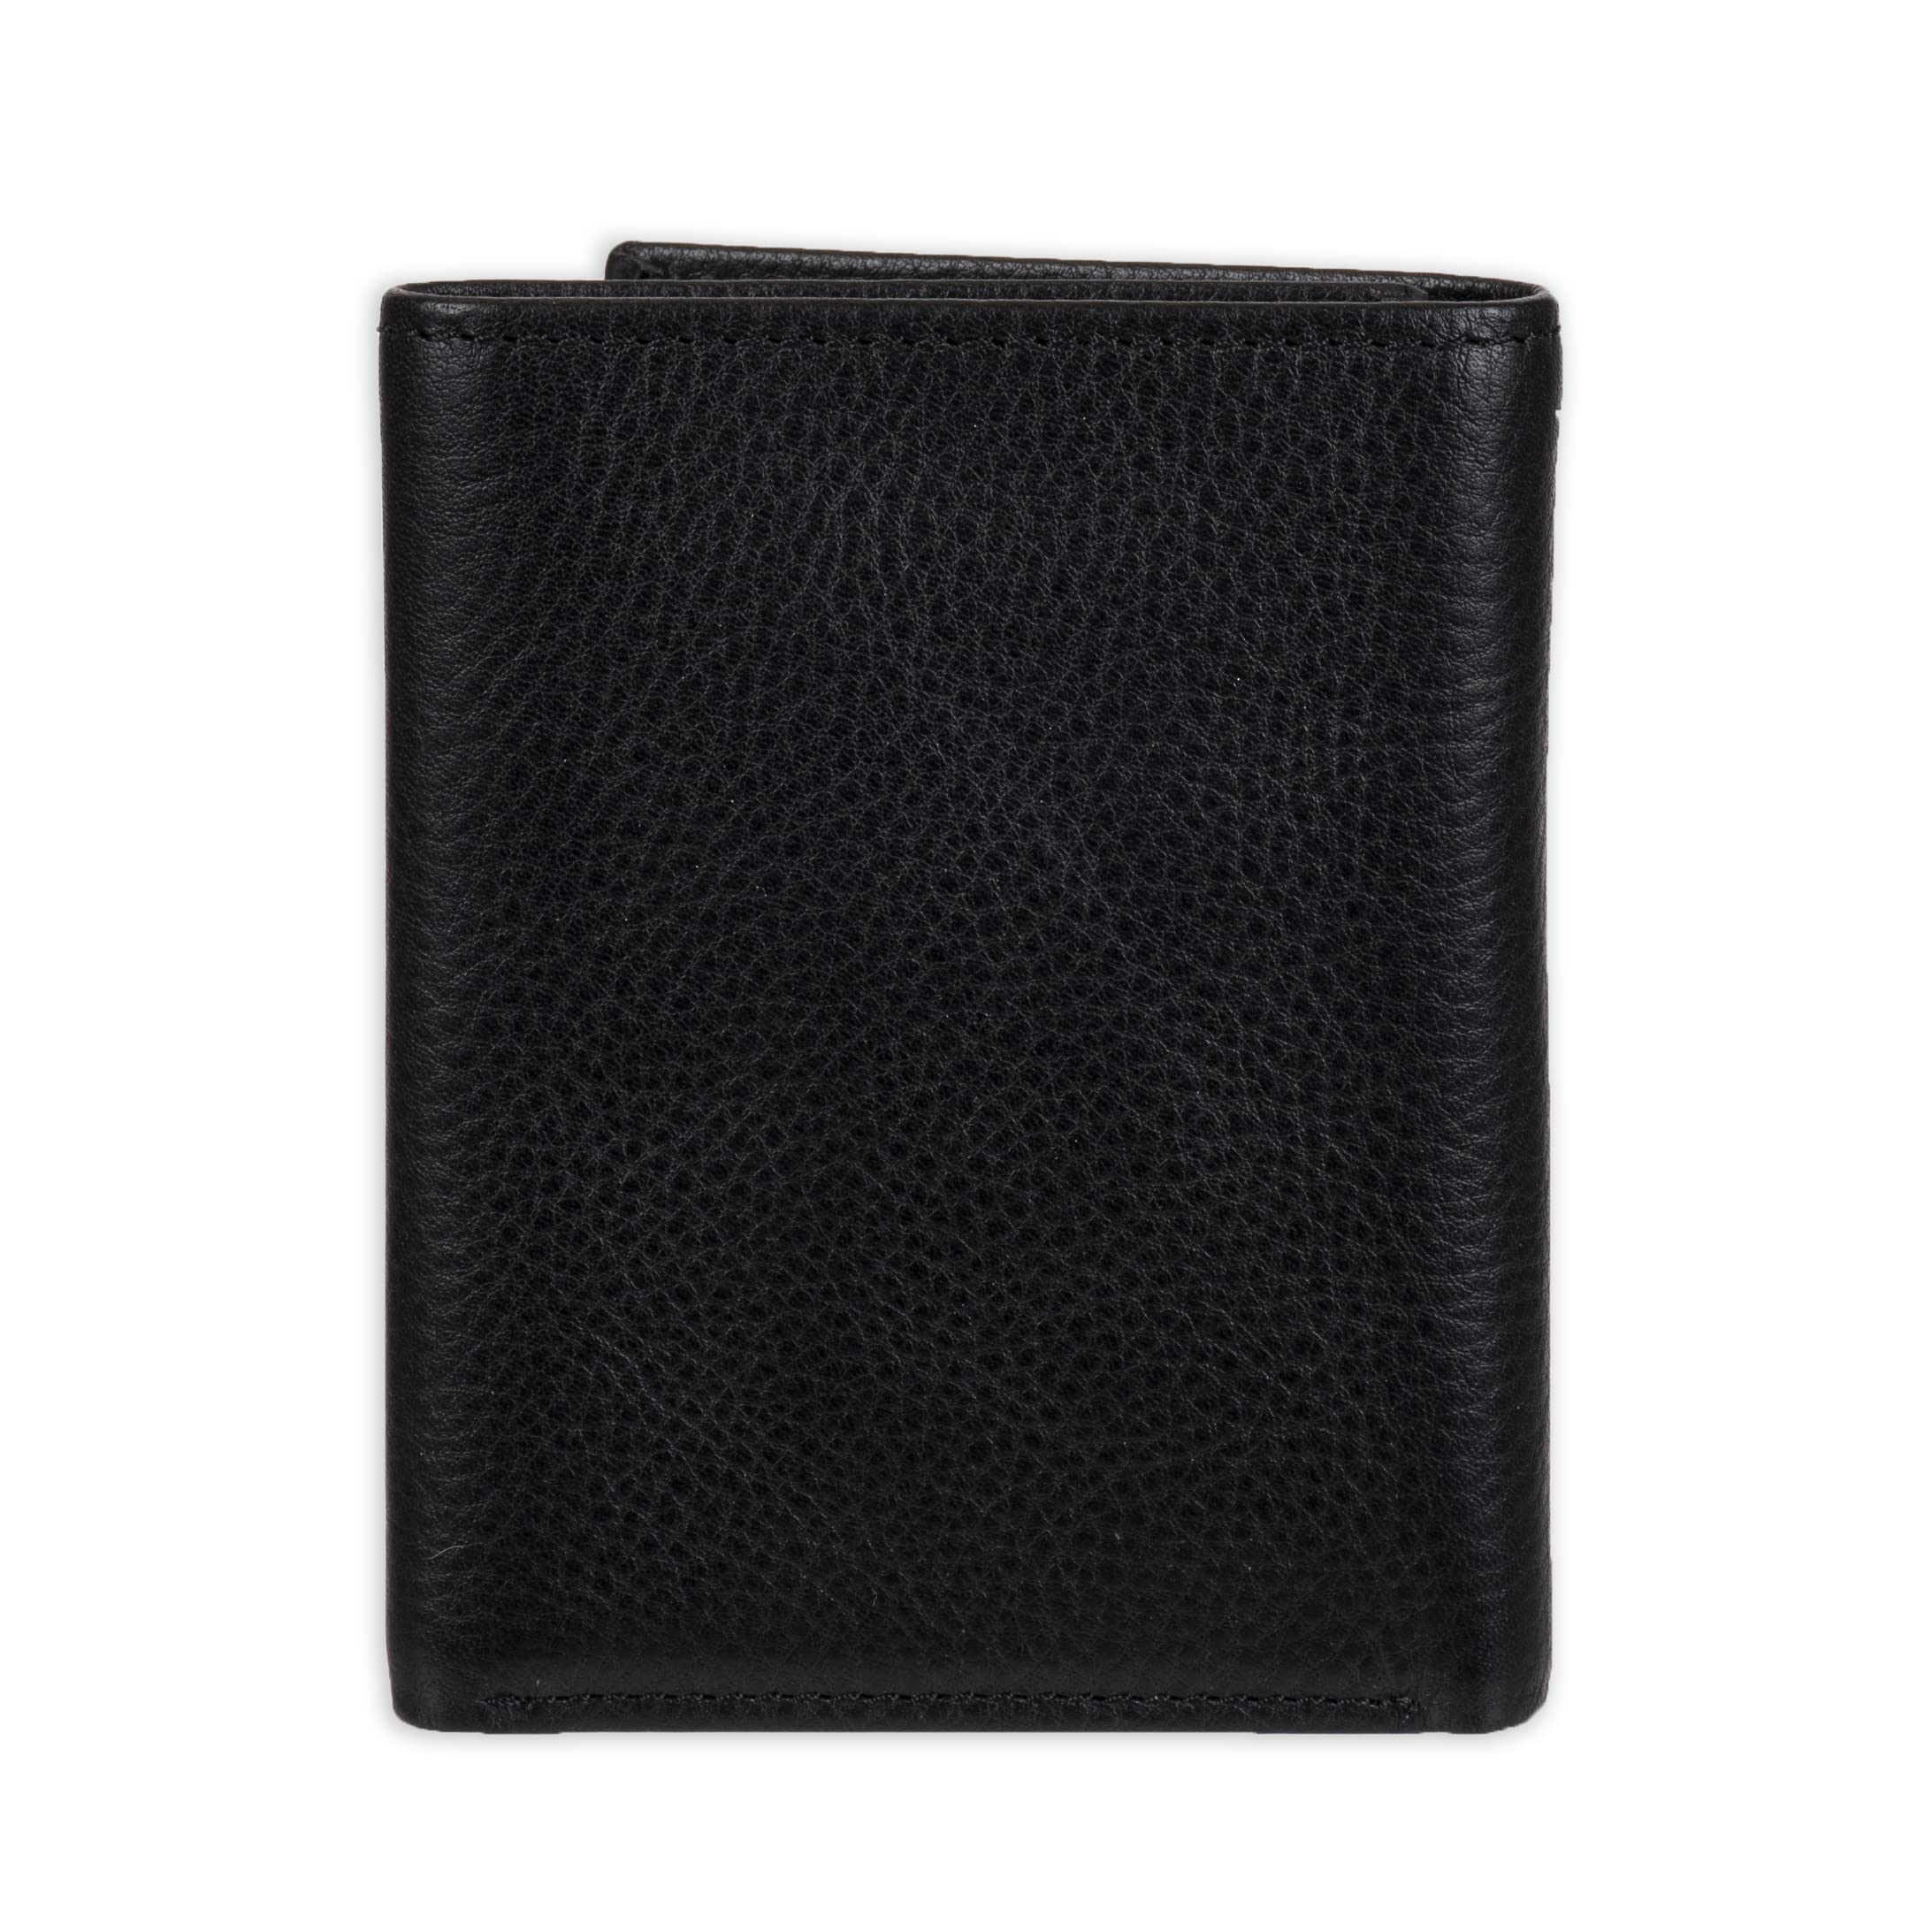 Tommy Hilfiger Men's Genuine Leather Slim Trifold Wallet with ID Window